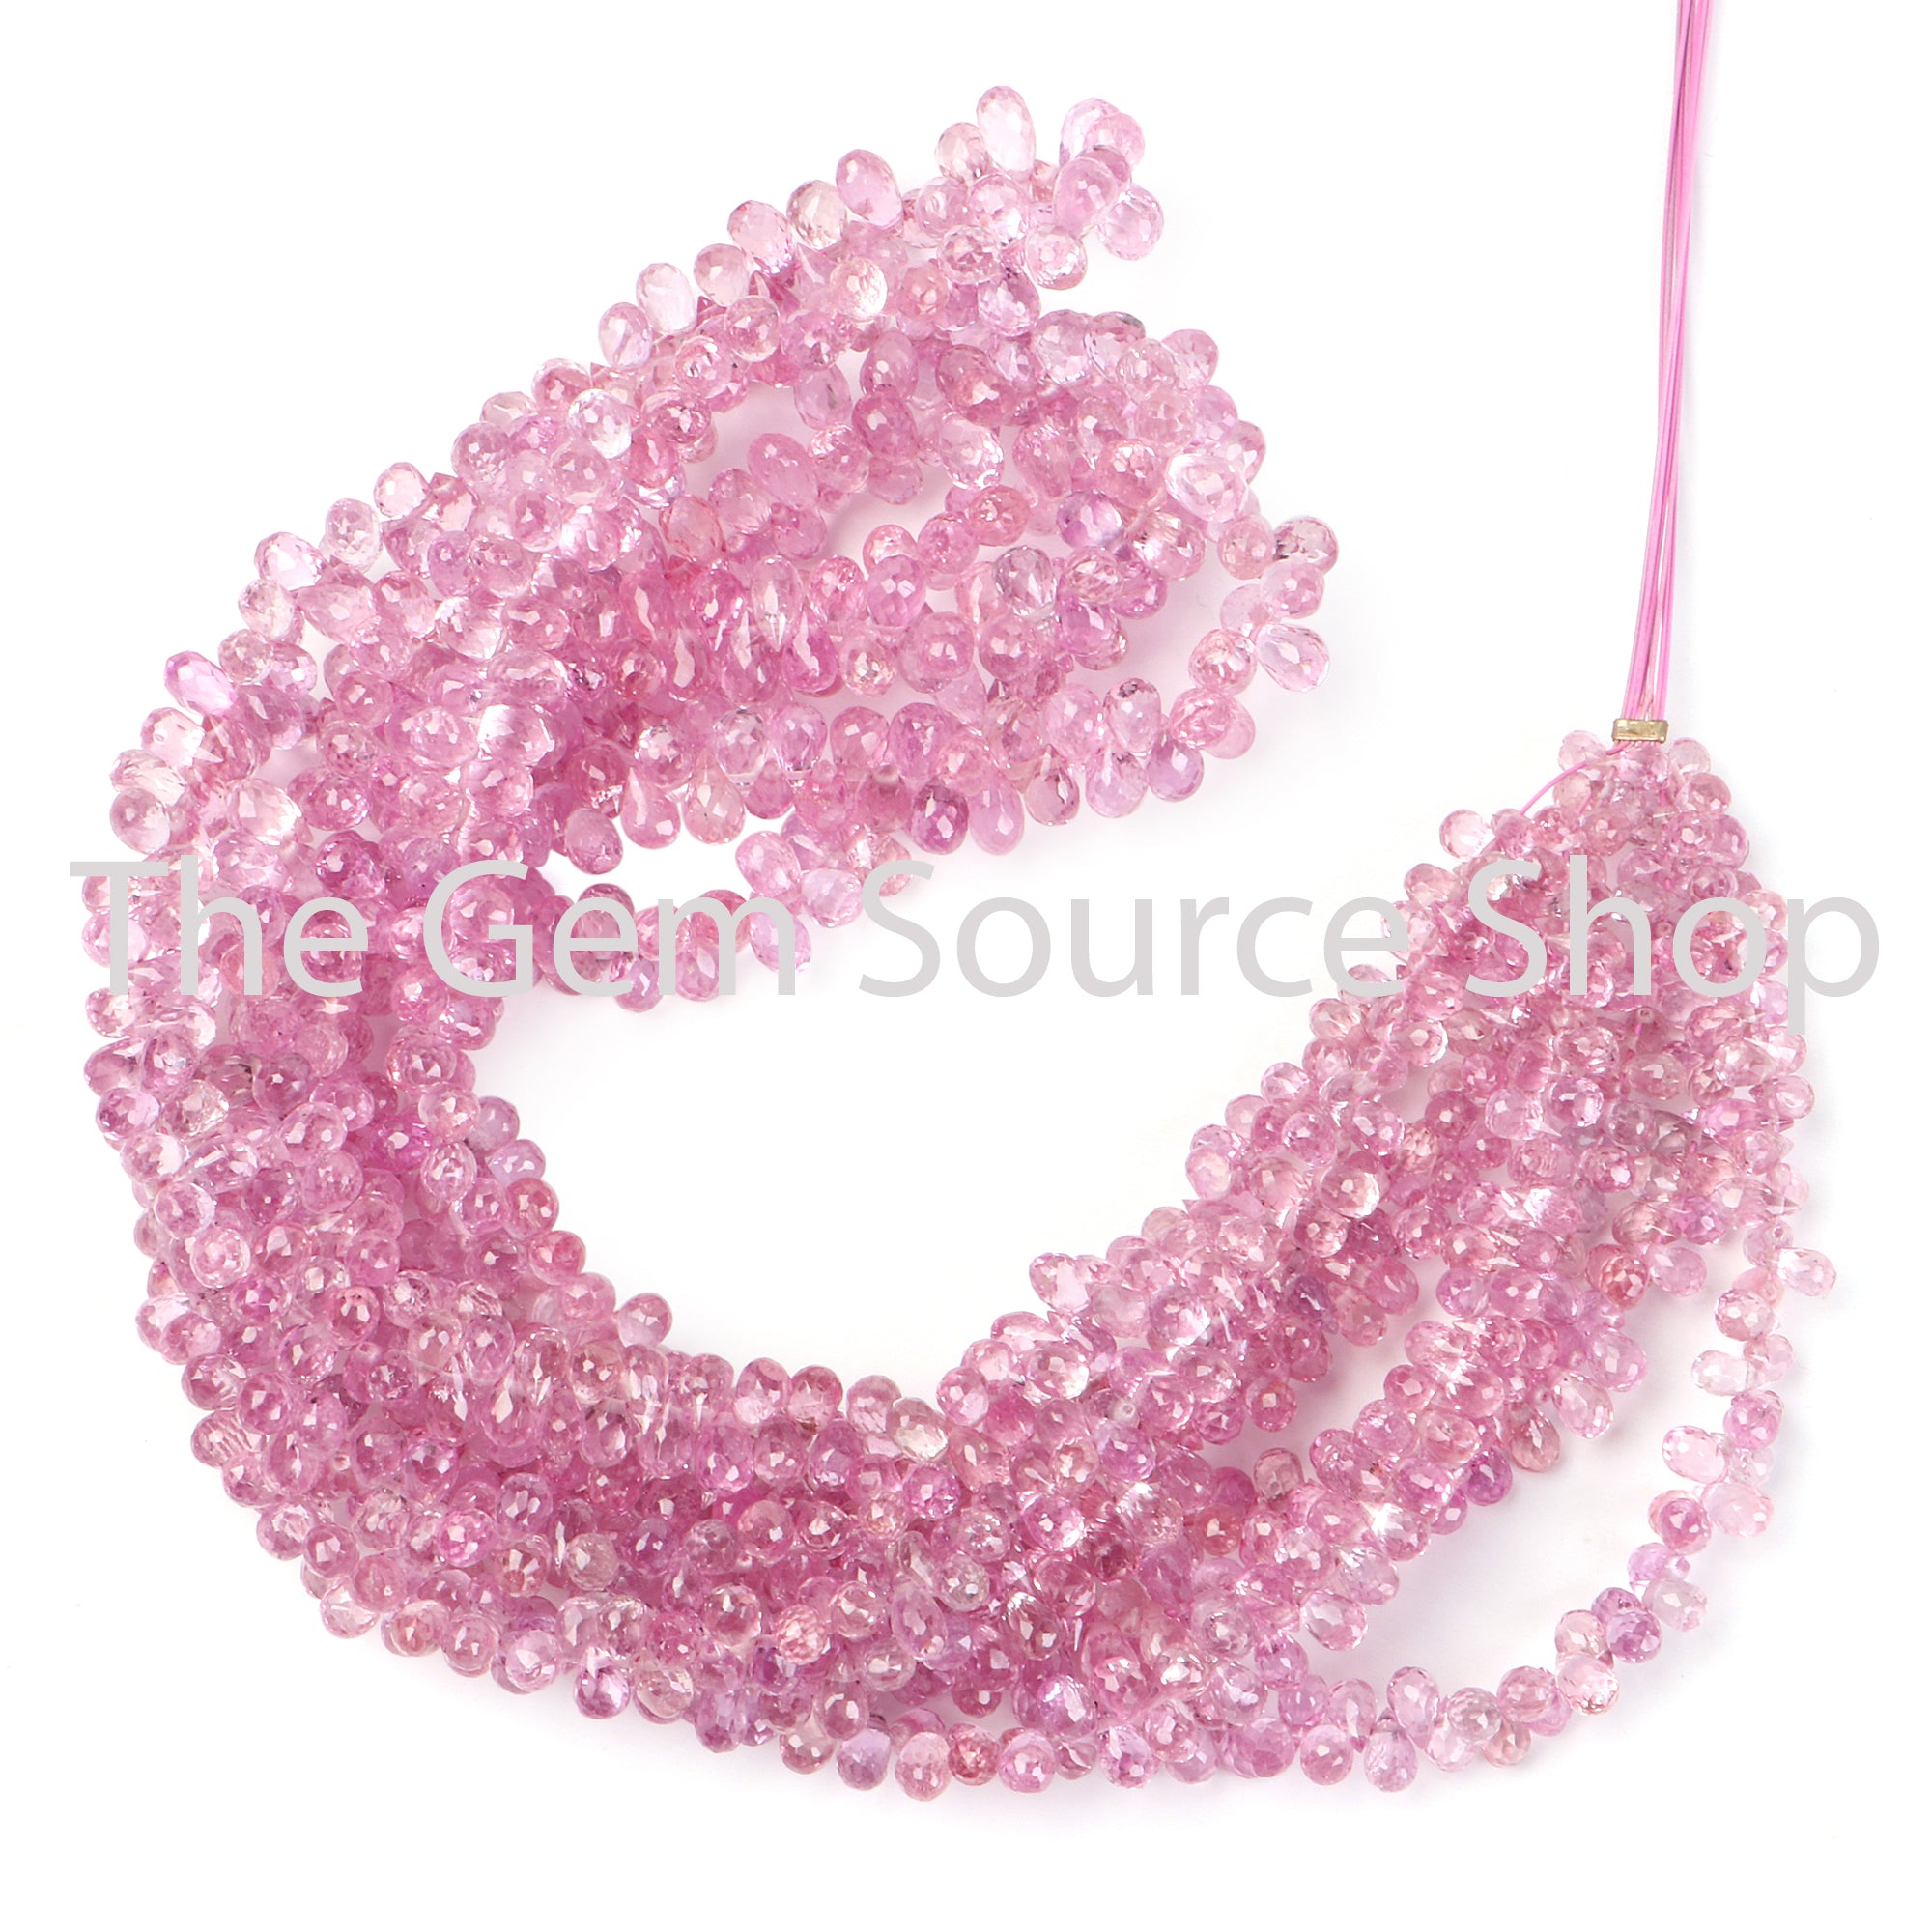 Burma Pink Sapphire Faceted Drops Shape Beads TGS-2225